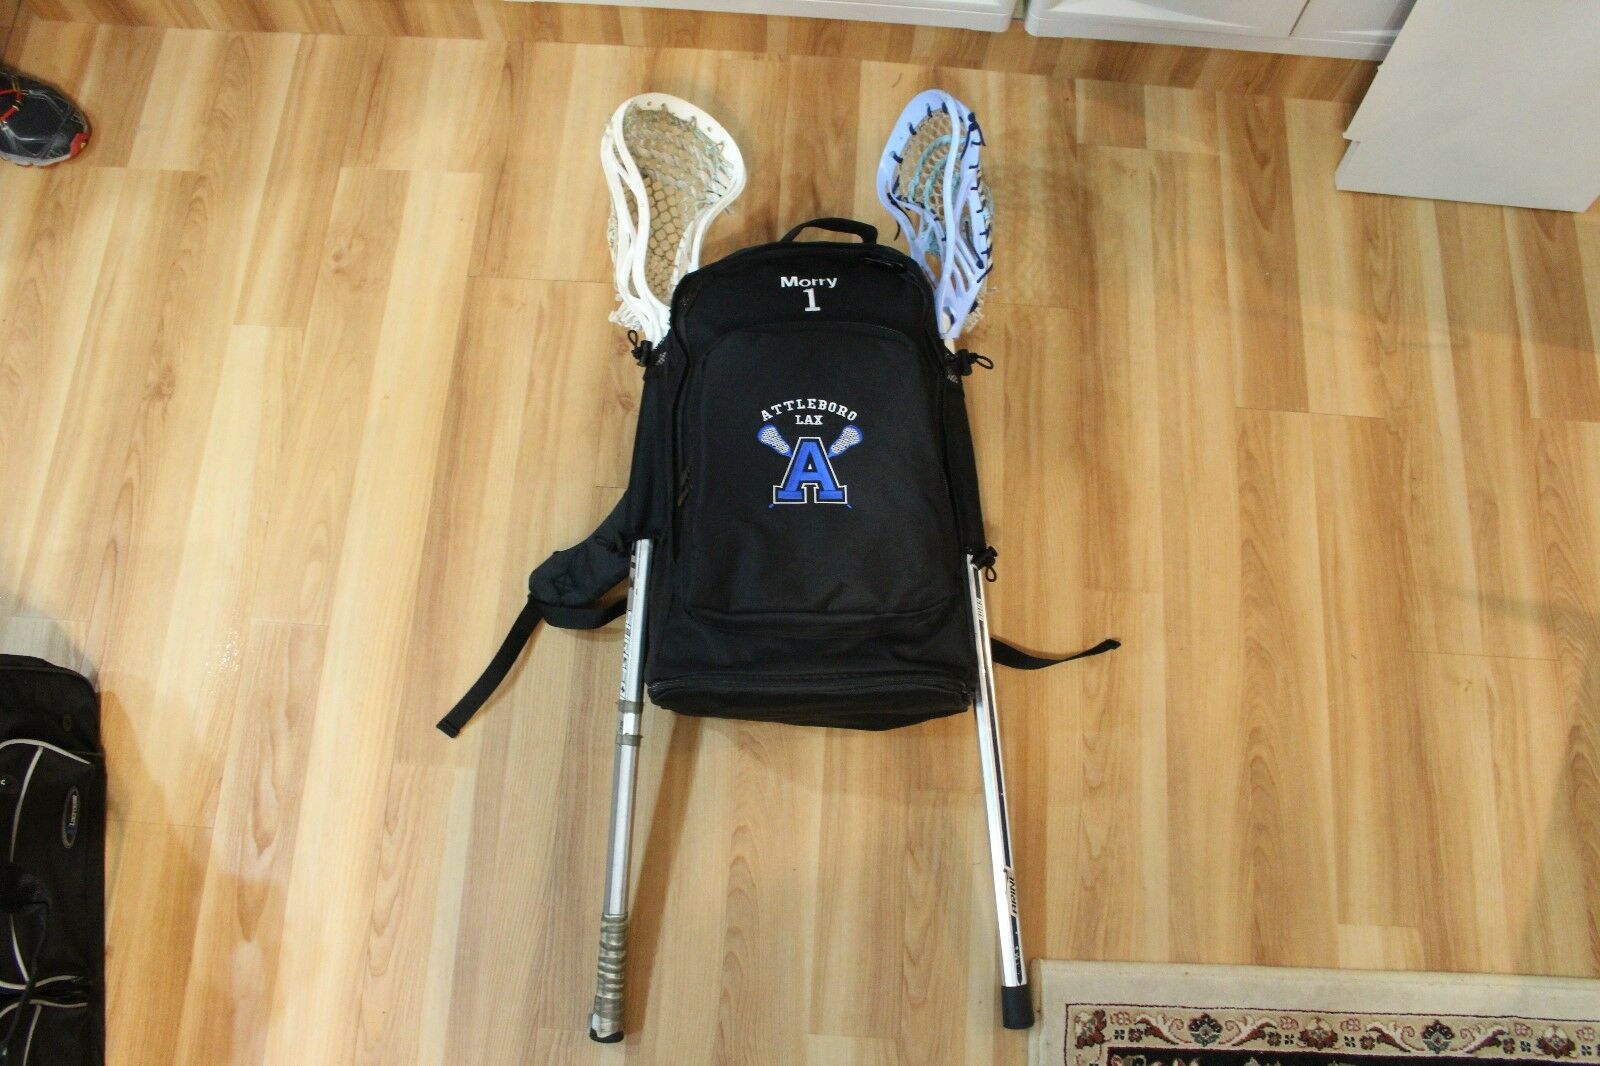 DELUXE LACROSSE BACKPACK GEAR BAG PERSONALIZED FREE holds 2 sticks 